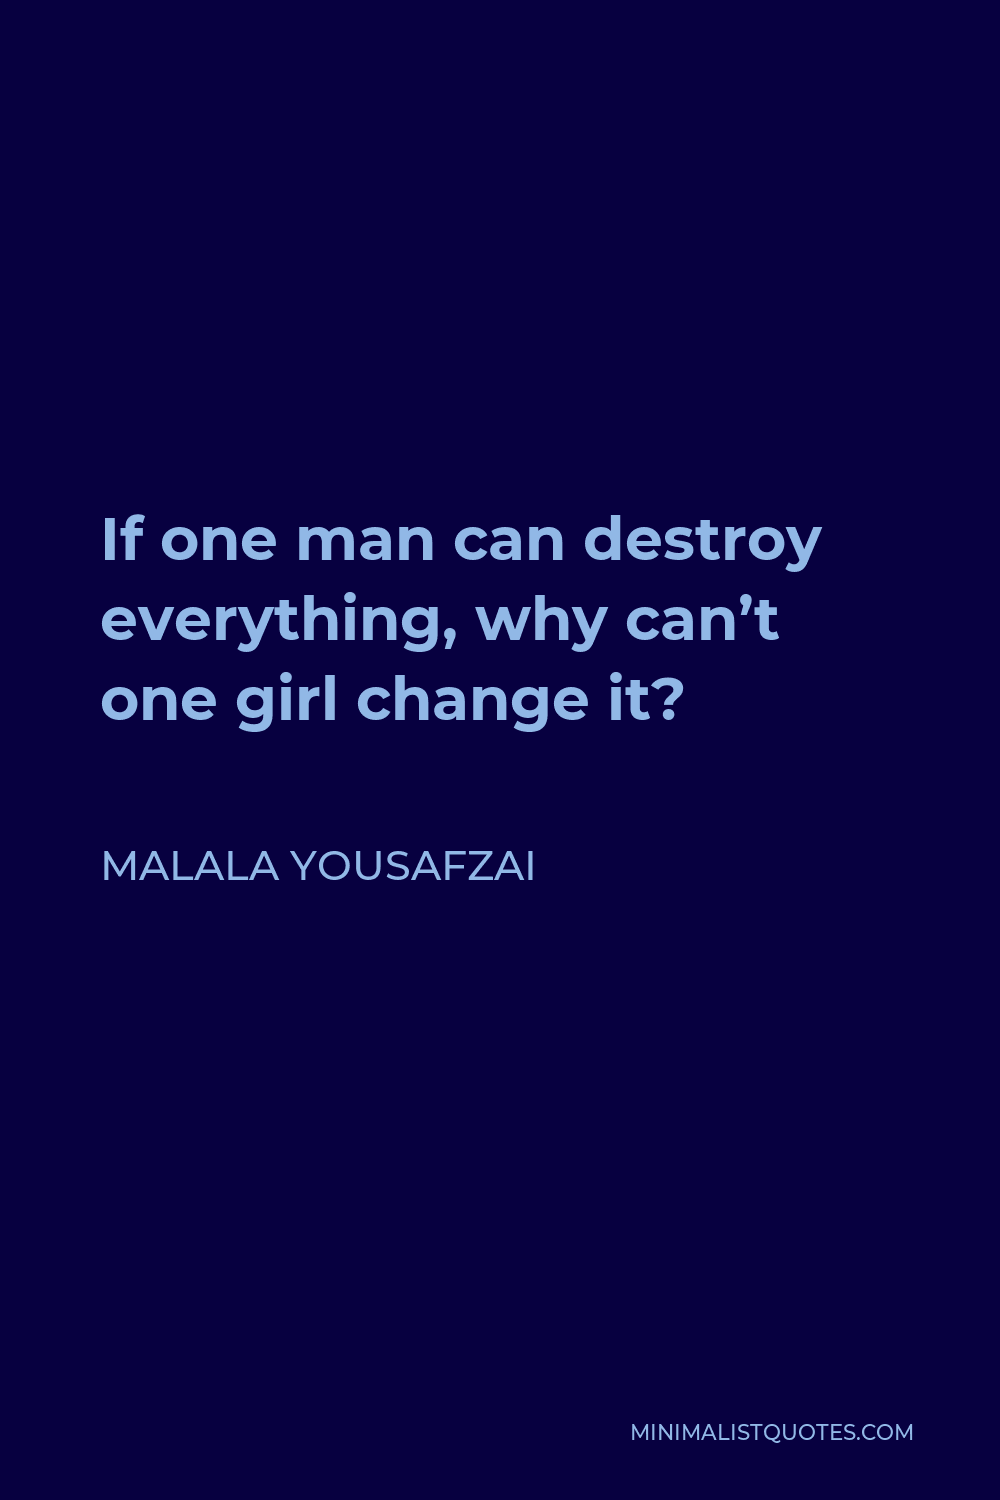 Malala Yousafzai Quote - If one man can destroy everything, why can’t one girl change it?